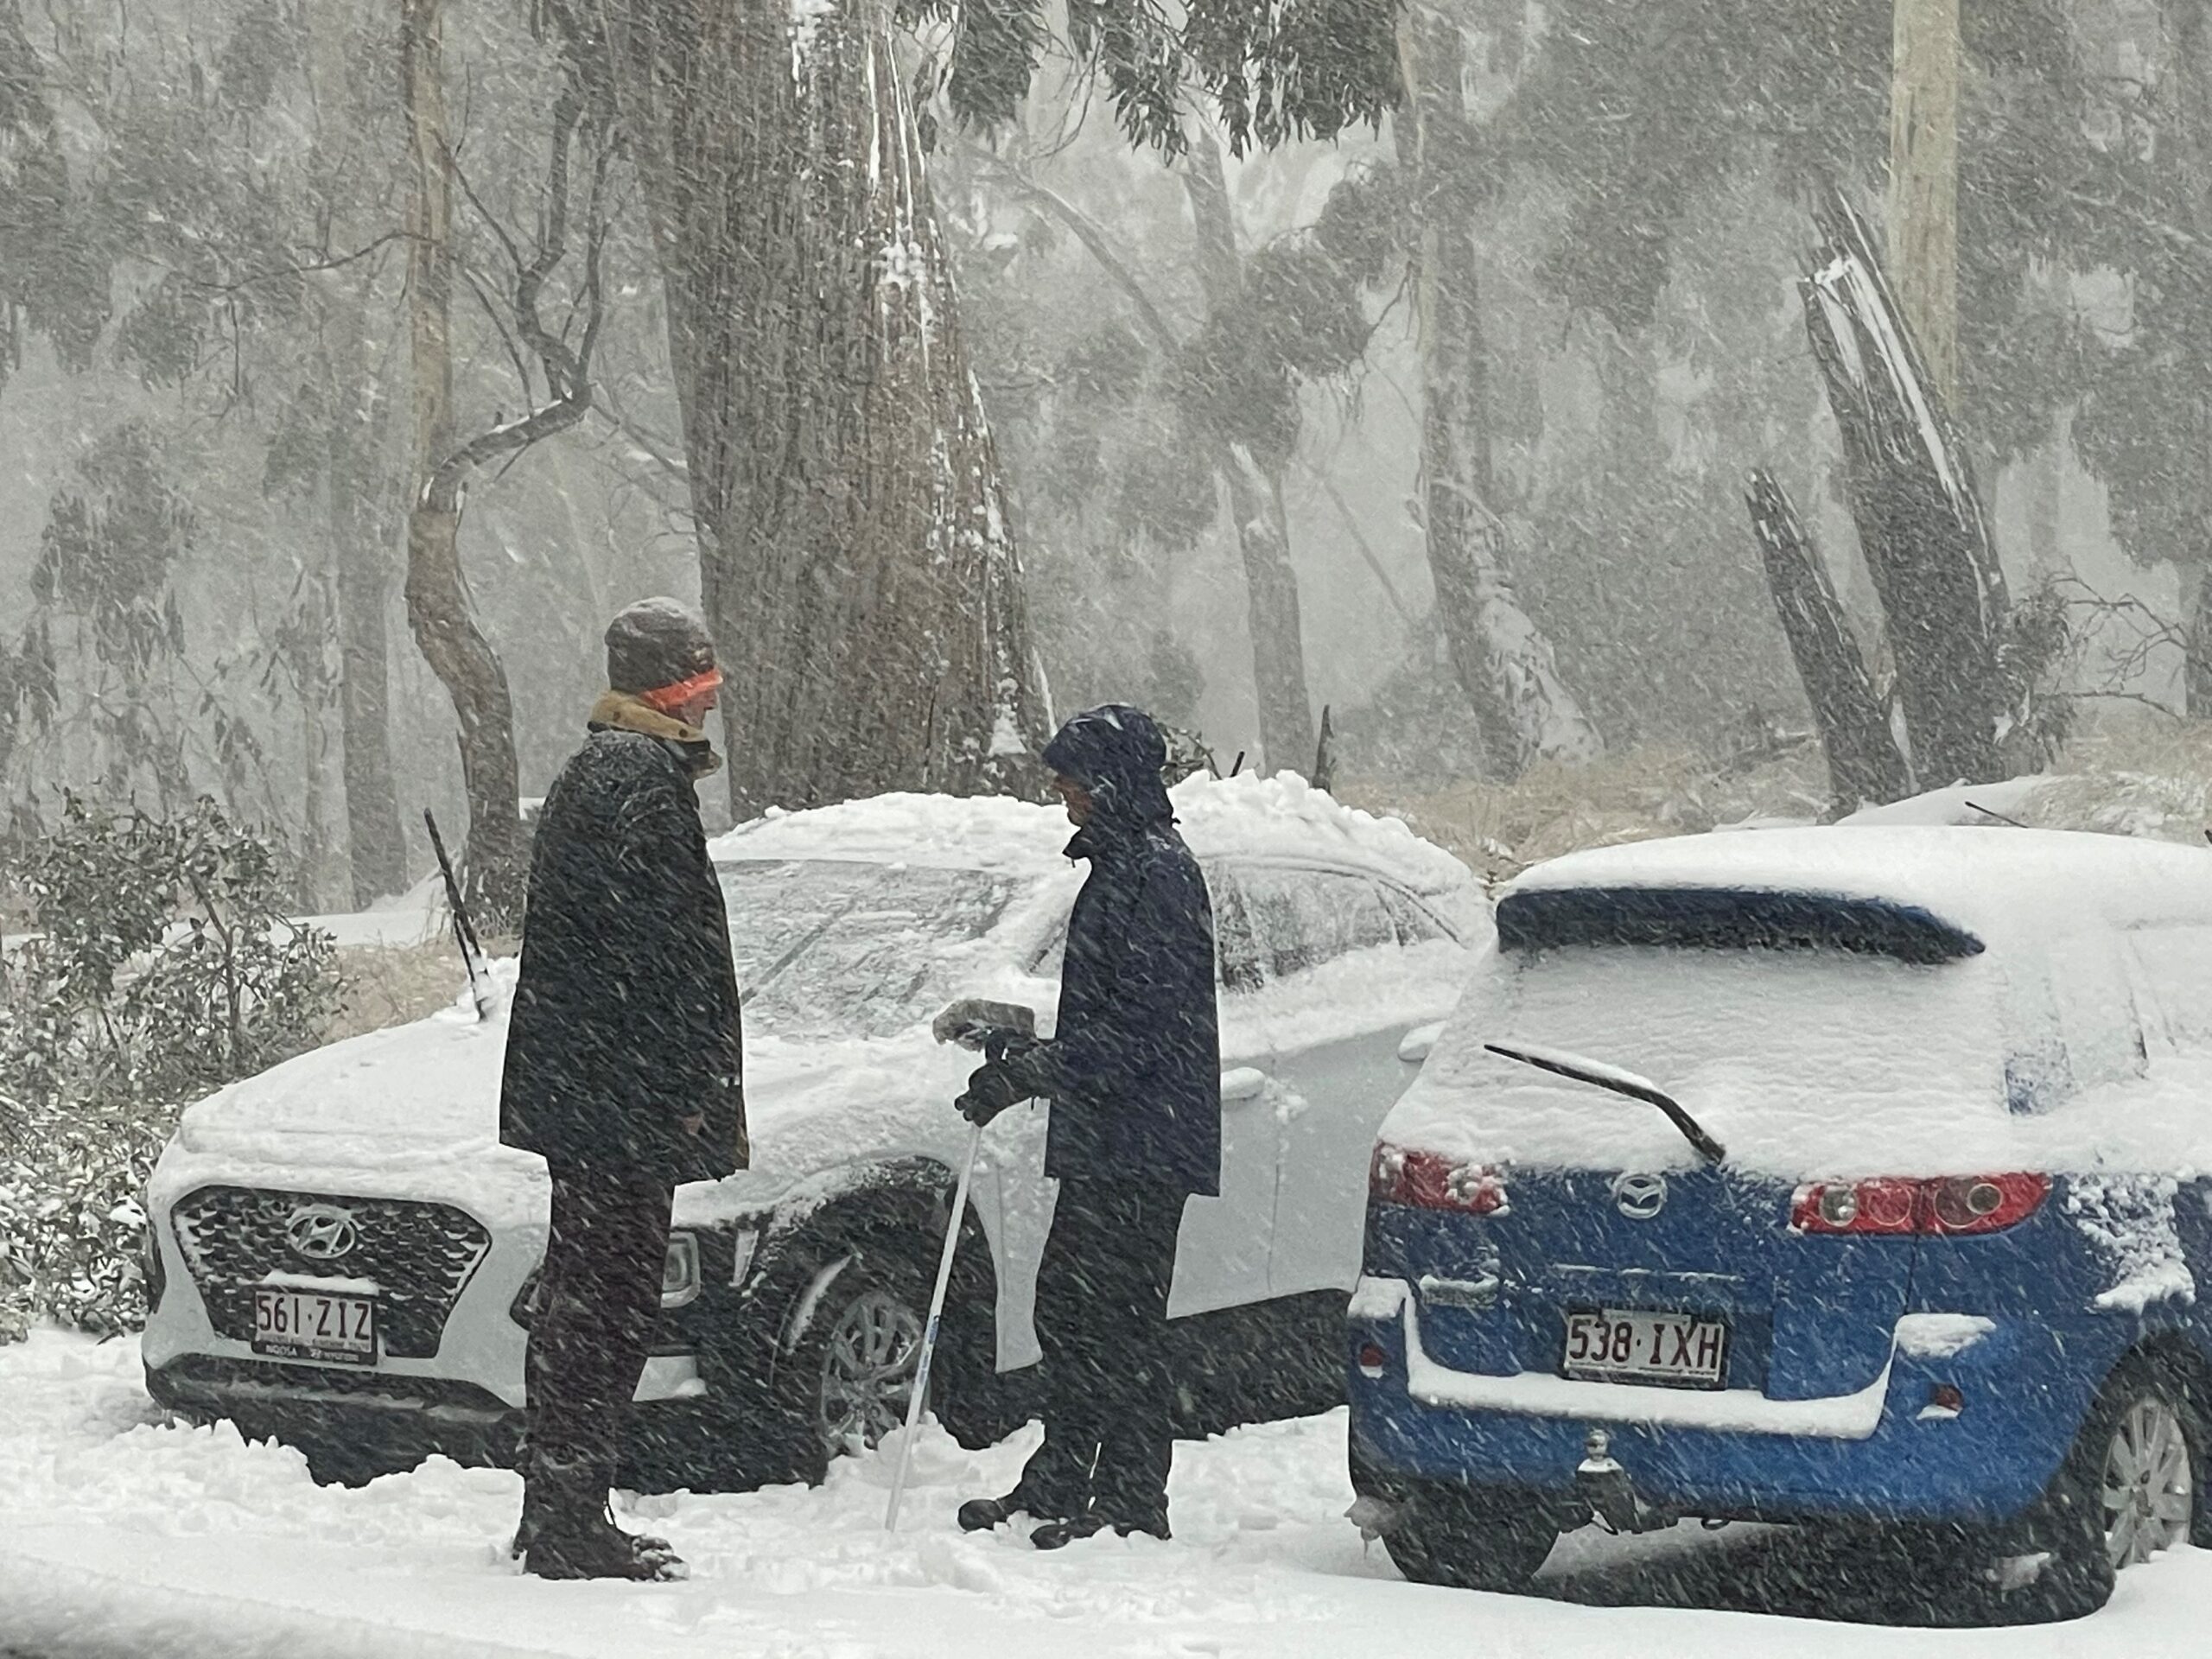 Queensland visitors Paul Rees and Dave Gotterson inspect their cars as the snow storm begins to worsen.